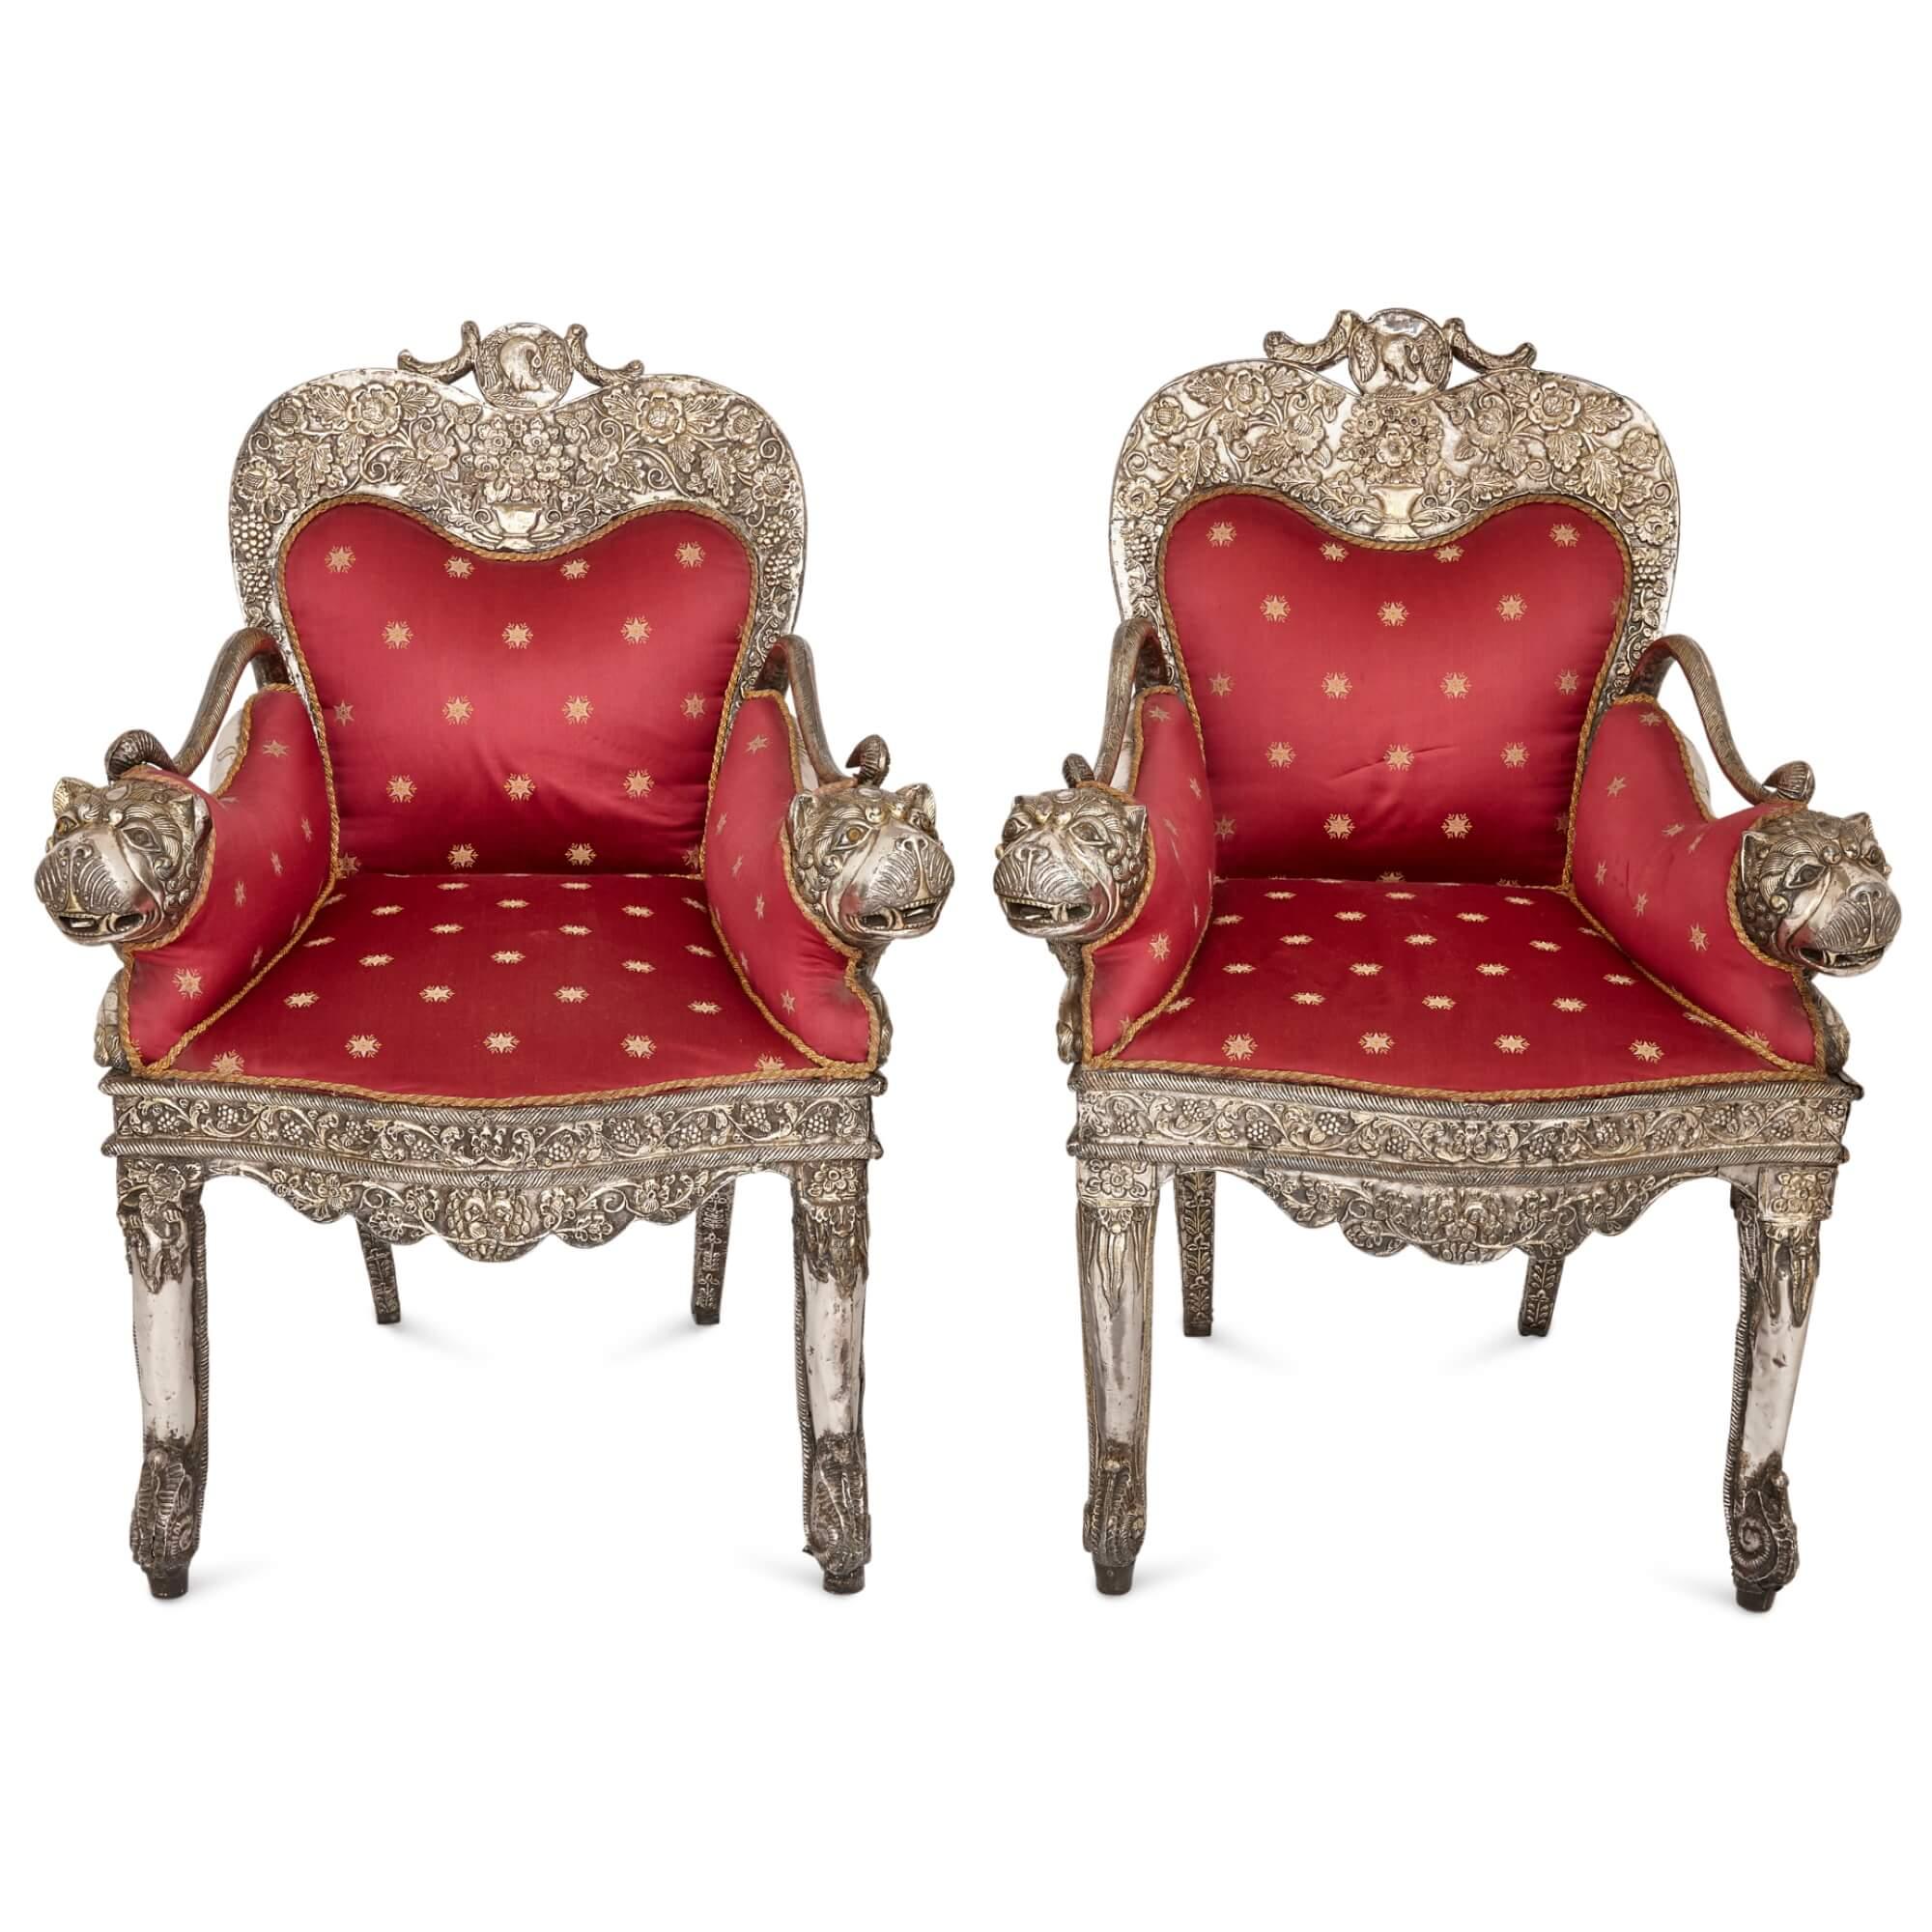 Pair of Indian repoussé silver upholstered chairs 
Indian, 19th Century 
Height 97cm, width 71cm, depth 62cm

Made from silver in 19th century India, this pair of chairs is adorned with a plethora of complex motifs and is a demonstration of the